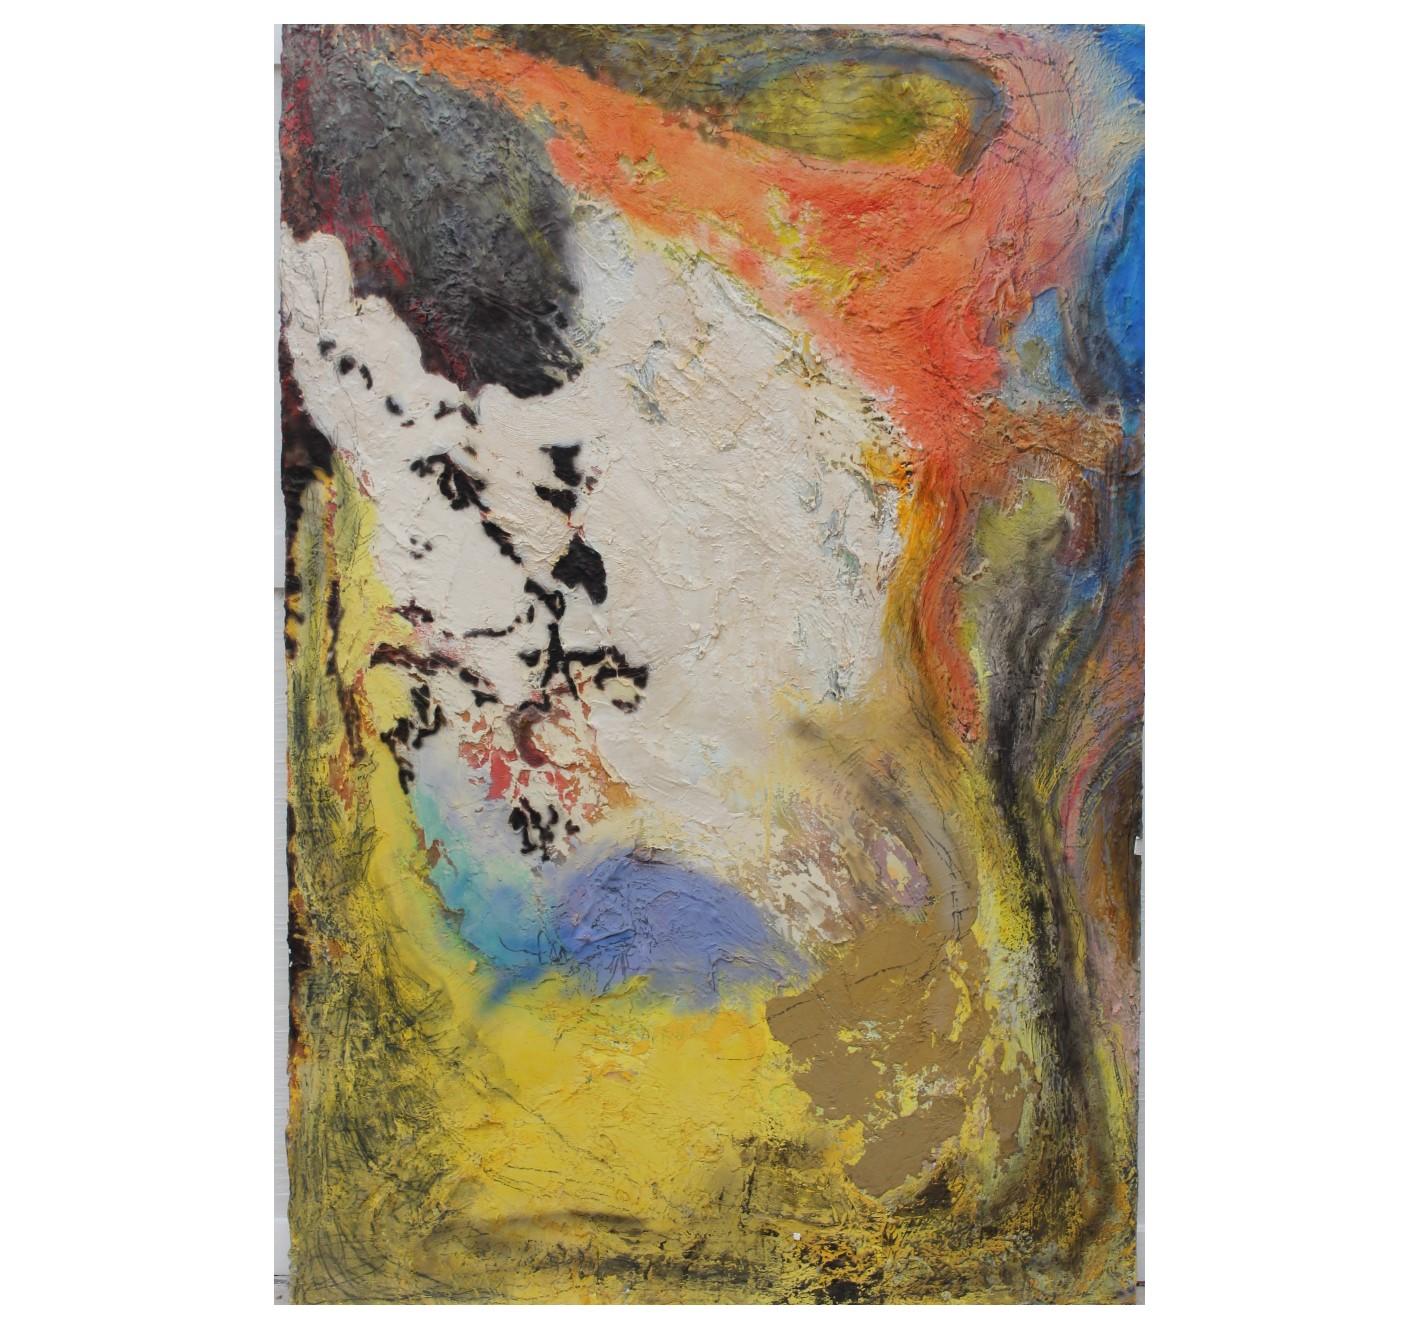 Large primary toned impasto expressionist painting. Canvas is not framed. Painting is titled, signed, and dated by the artist.

Artist Biography: Hippenstiel has been influenced by the German expressionism movement as well as contemporary painters. 